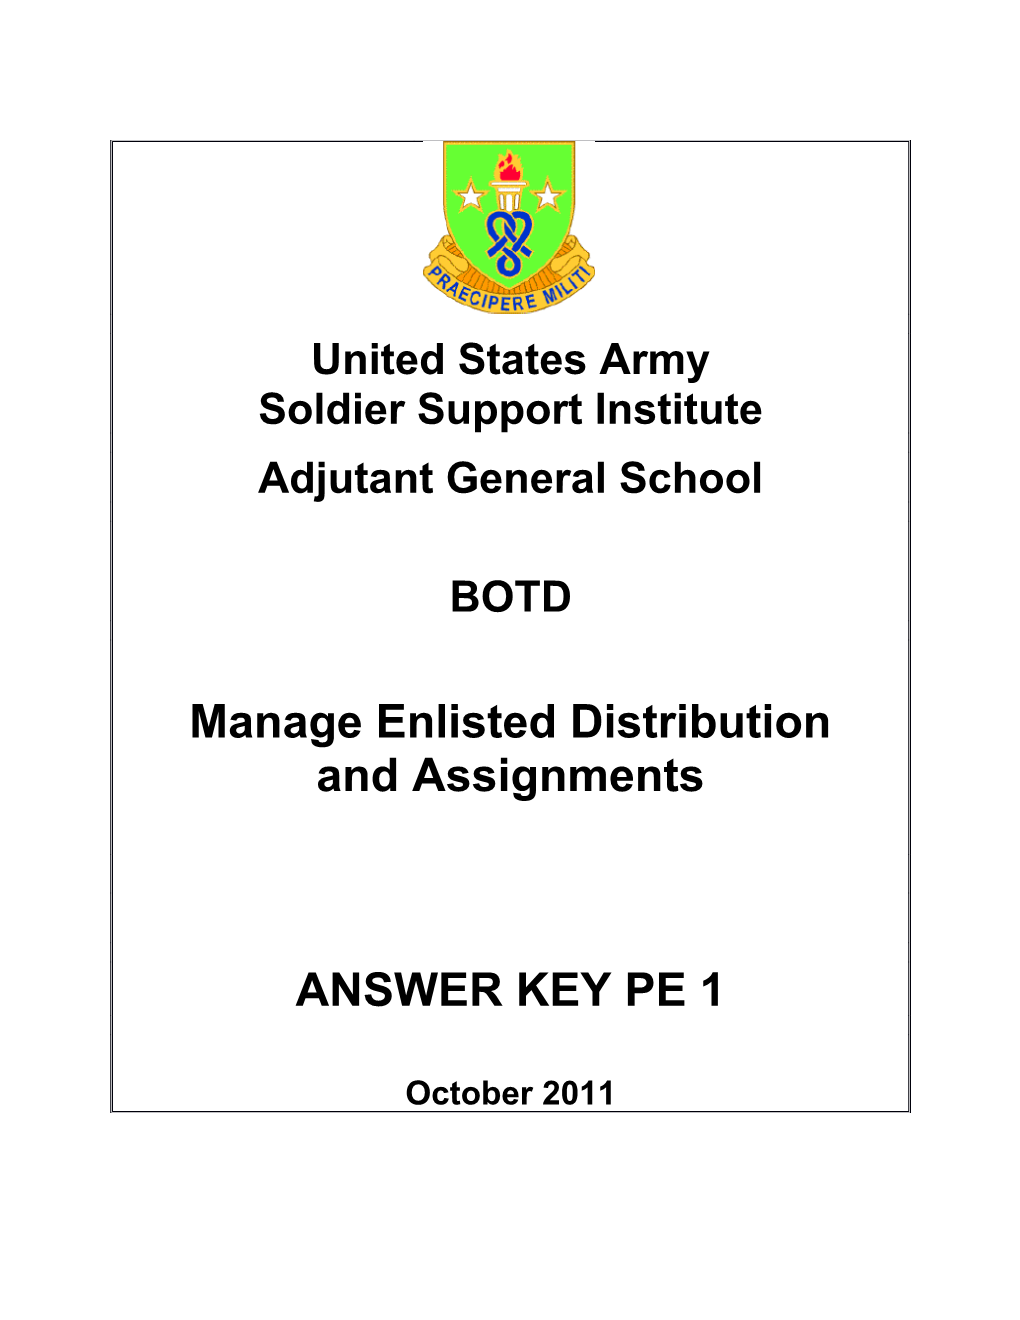 Manage Enlisted Distribution and Assignments